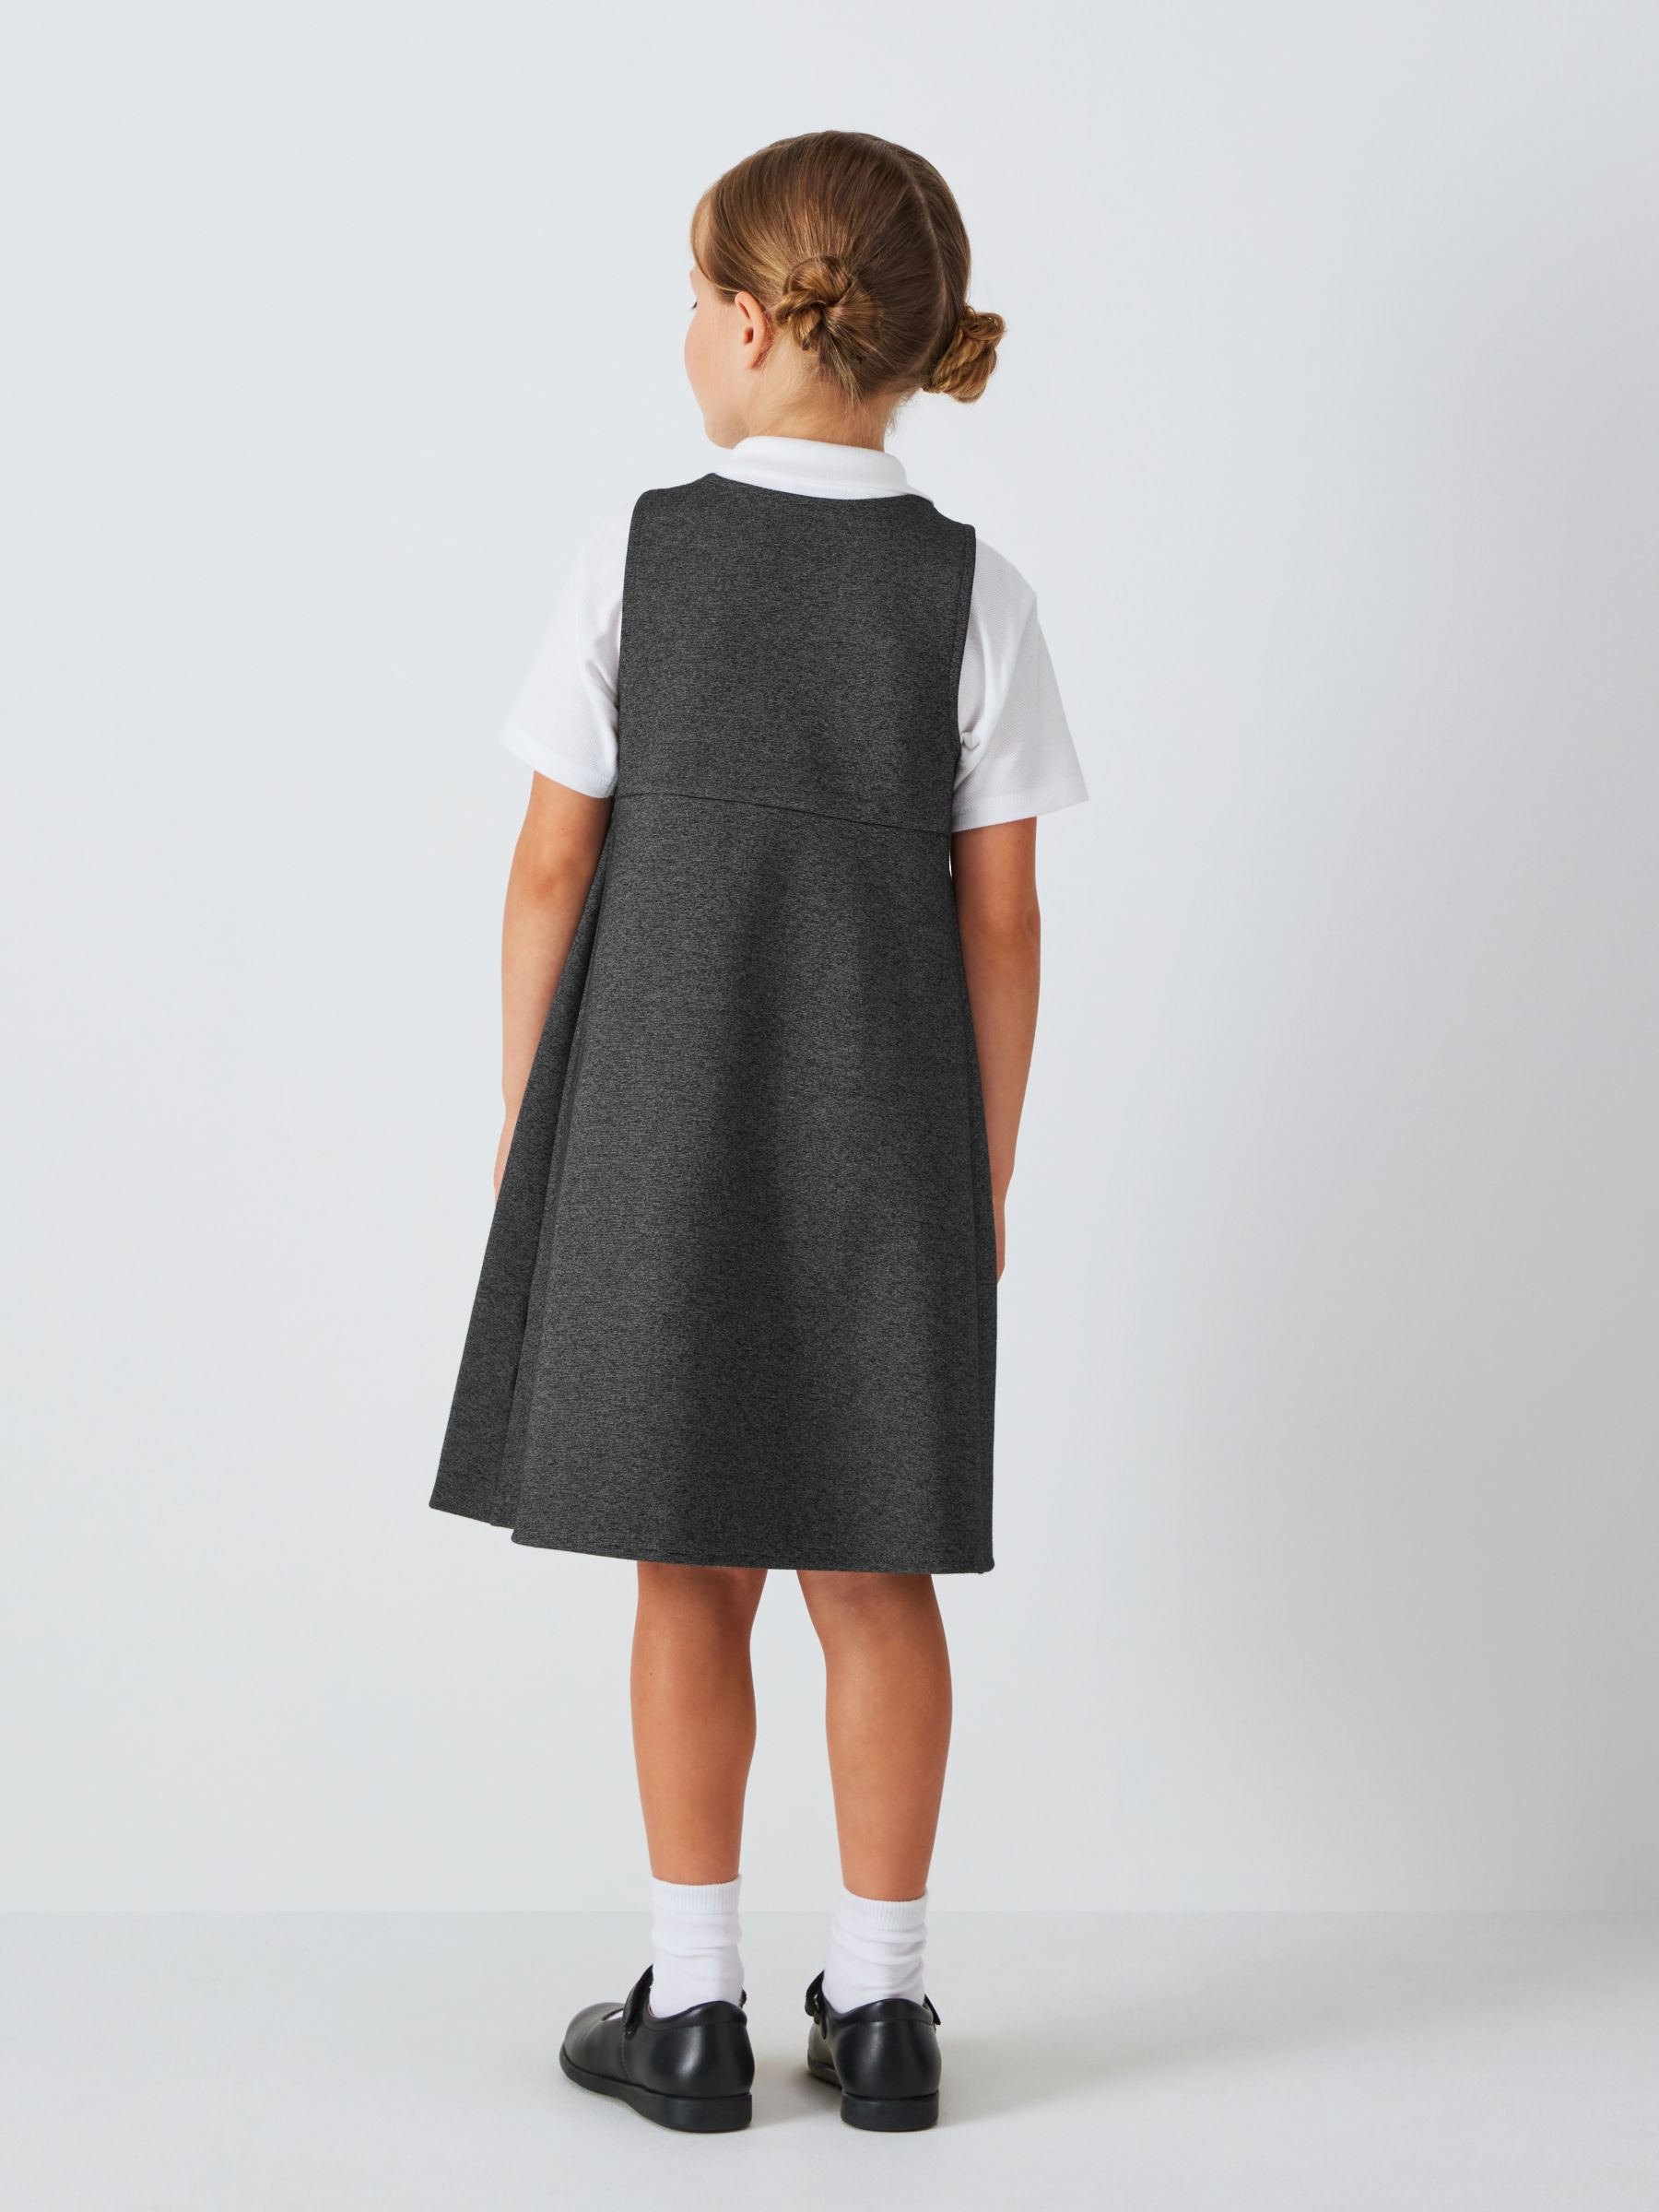 John Lewis Girls' Pleated School Tunic With Bow, Grey, 12 years